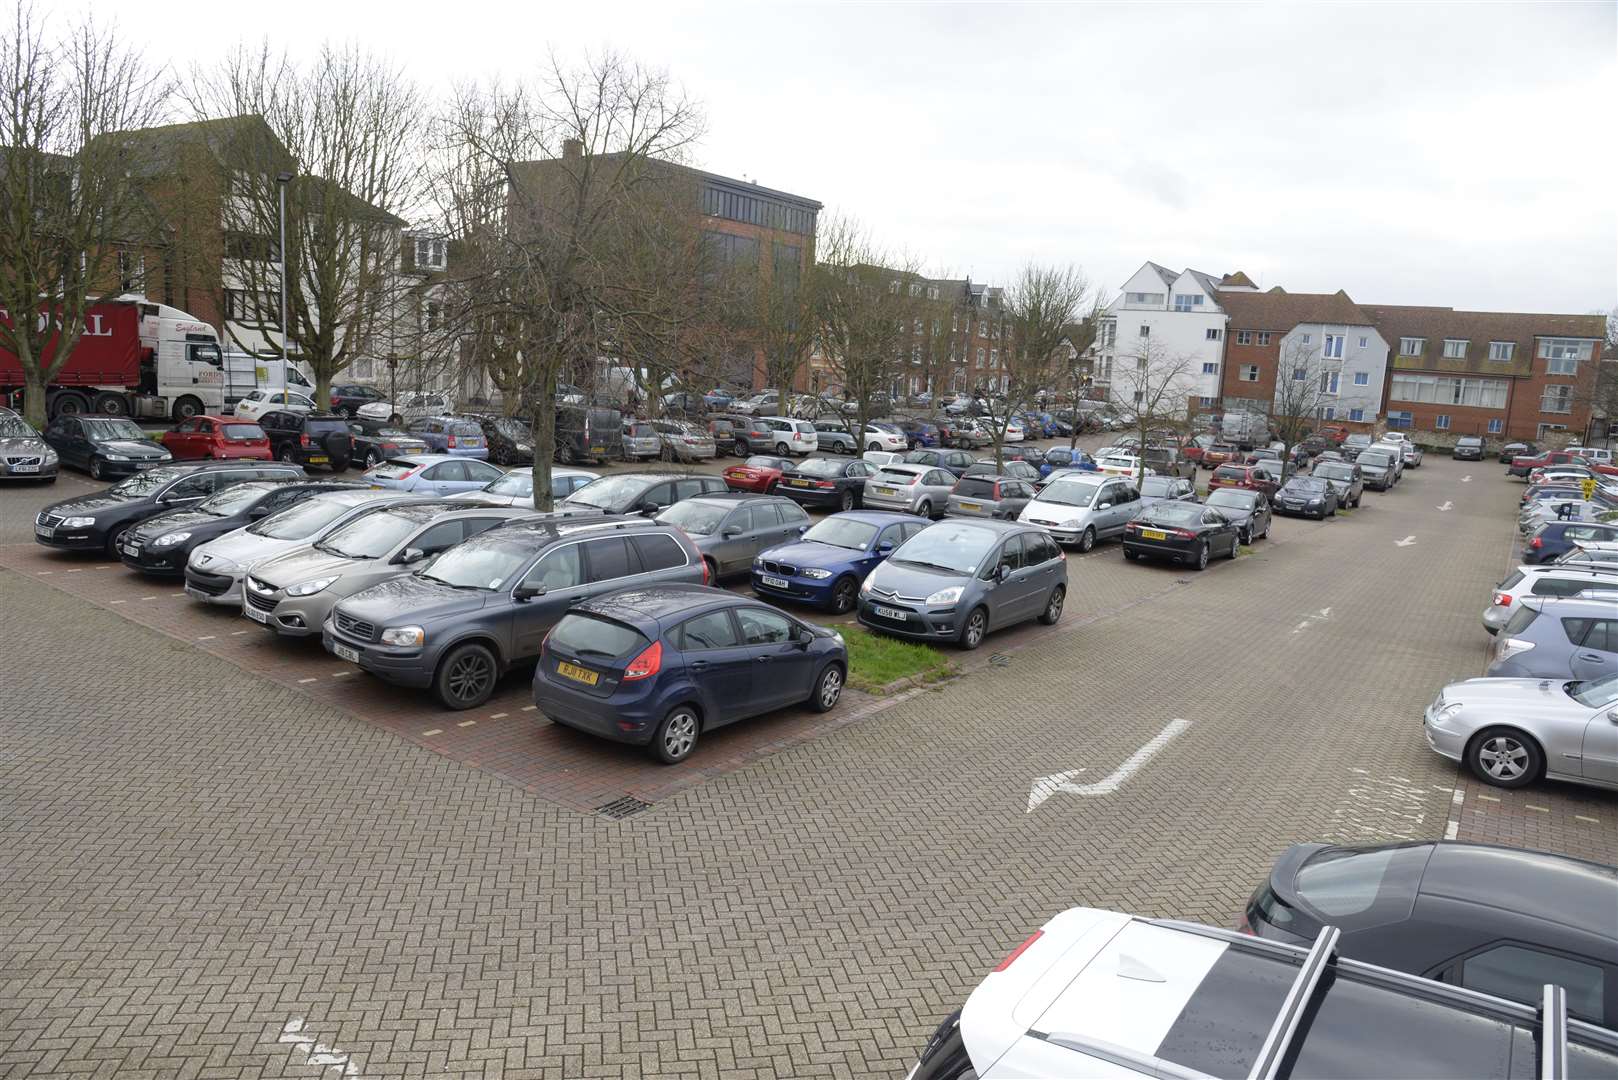 Station Road West car park is set to become a multi-storey